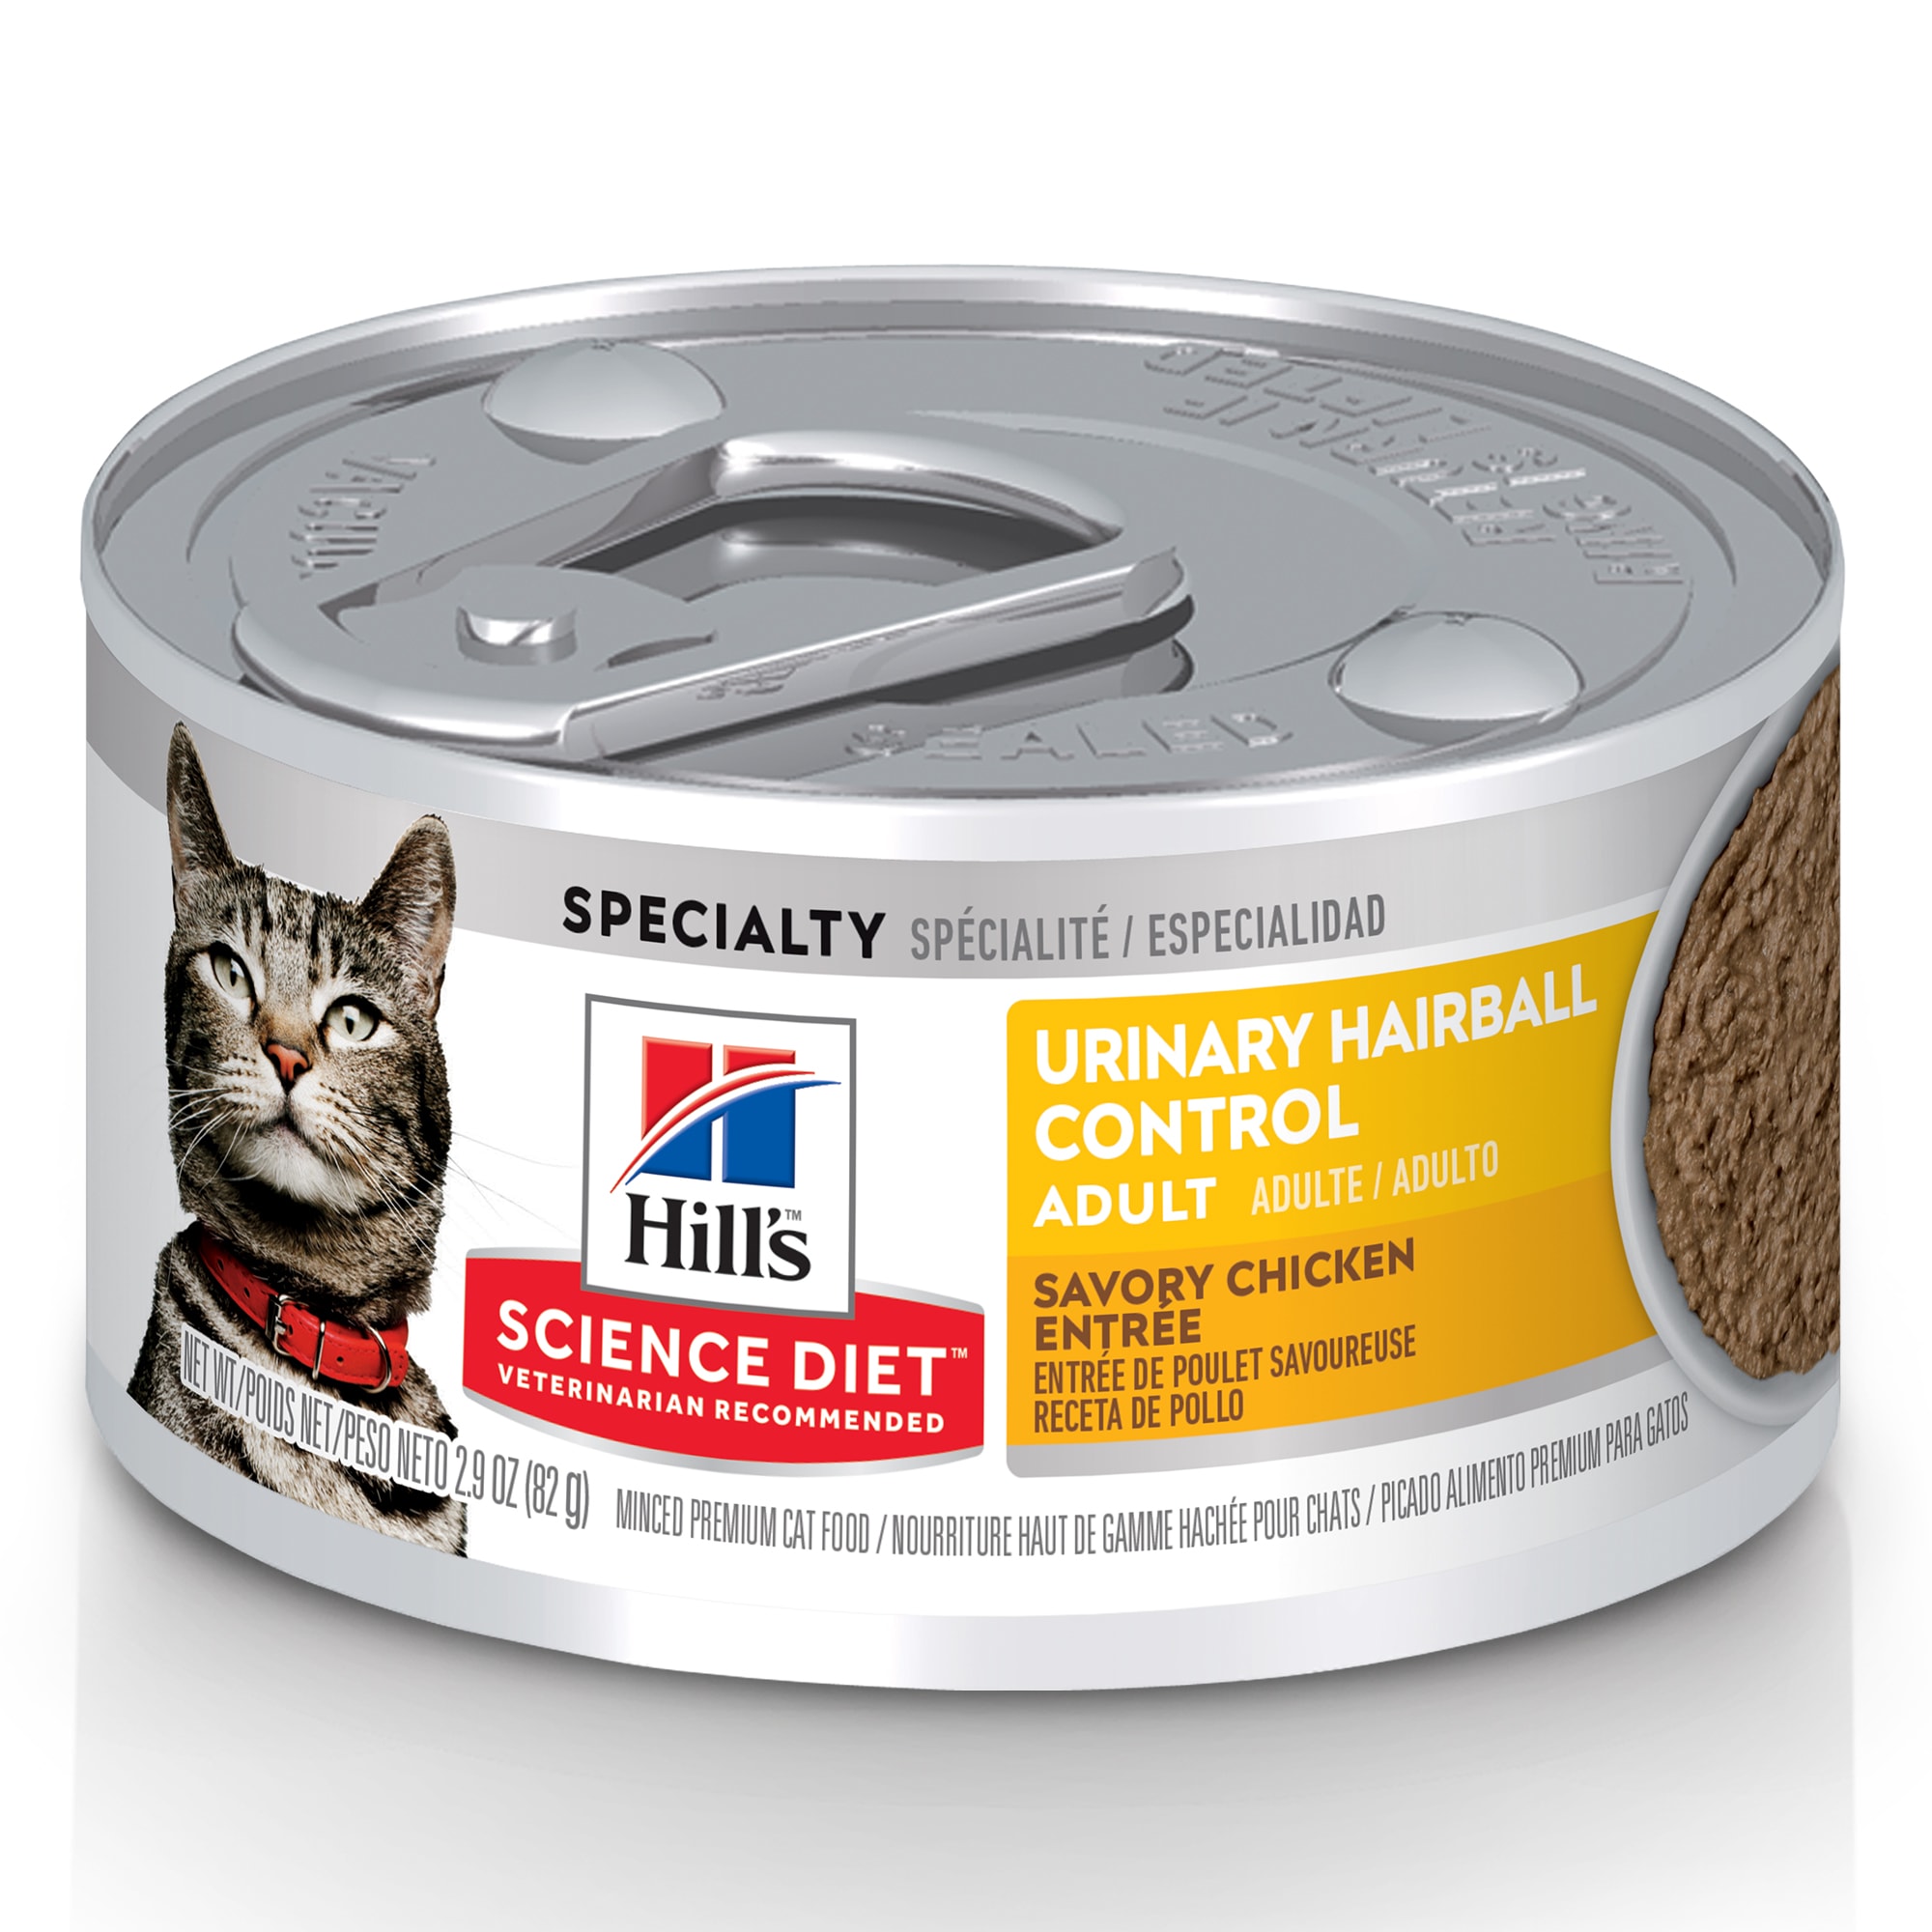 Hill's Science Diet Adult Urinary & Hairball Control, Savory